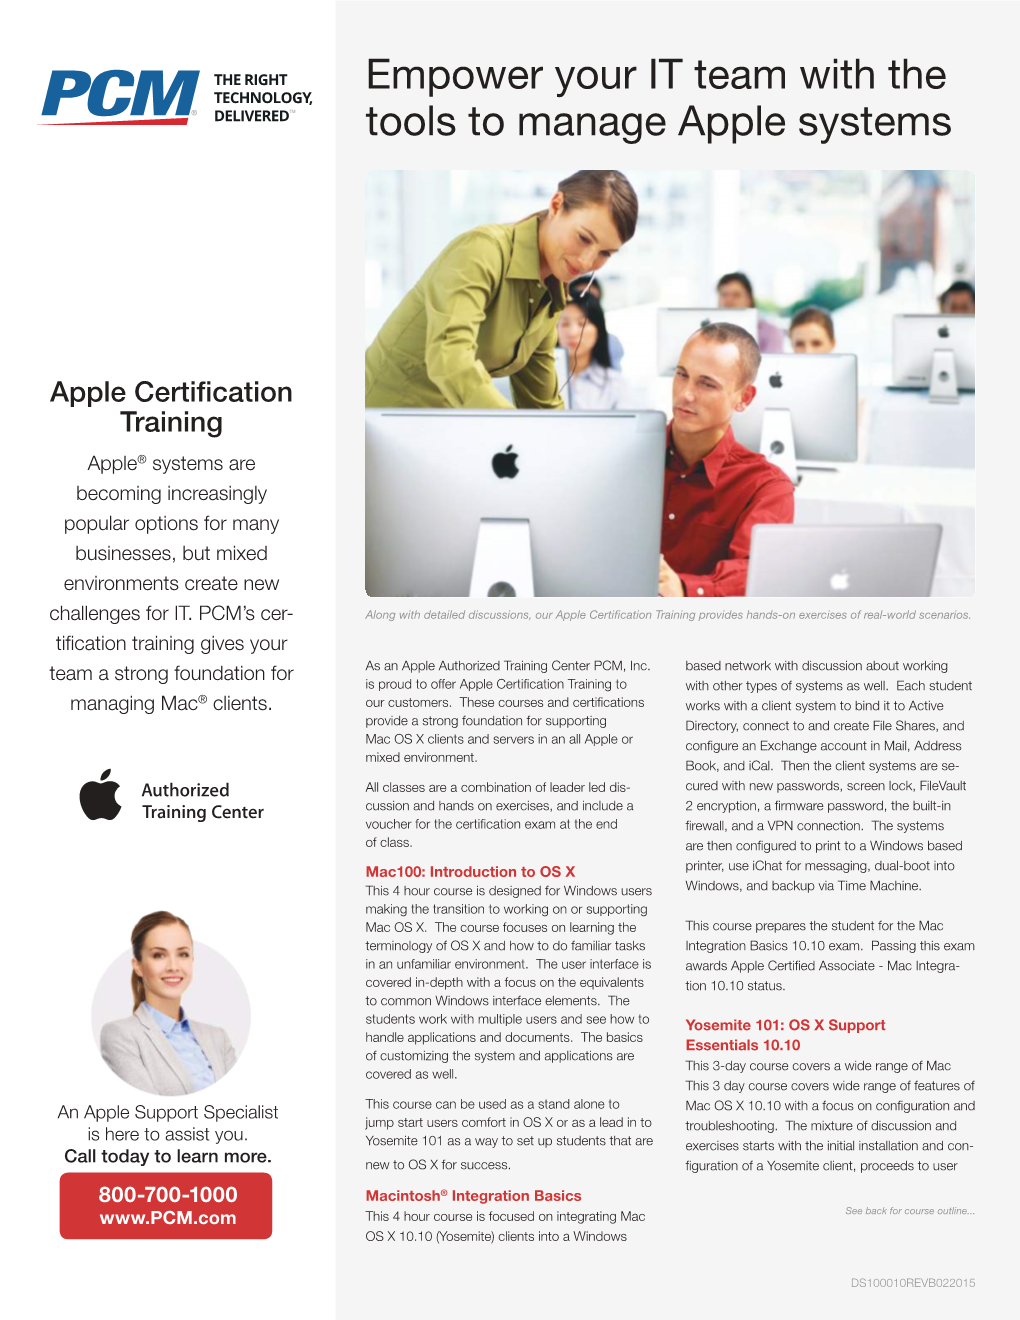 Empower Your IT Team with the Tools to Manage Apple Systems